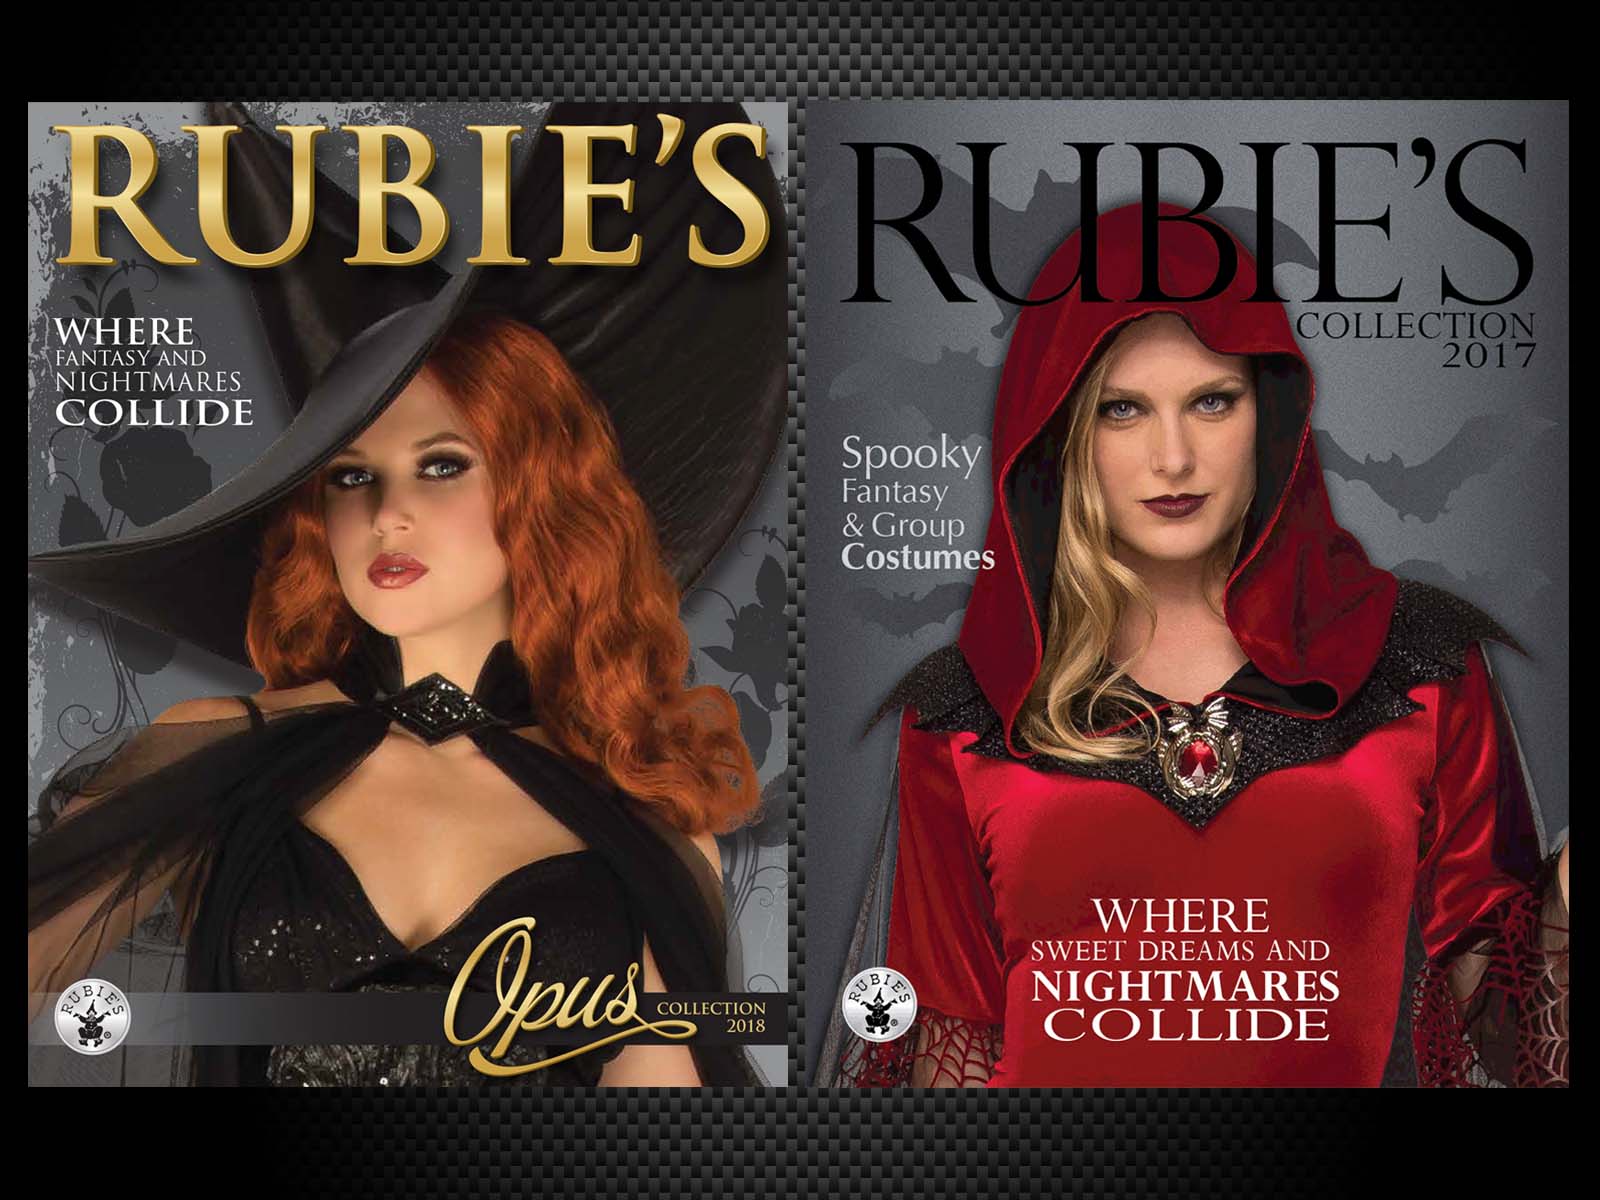 Print ad for Rubies